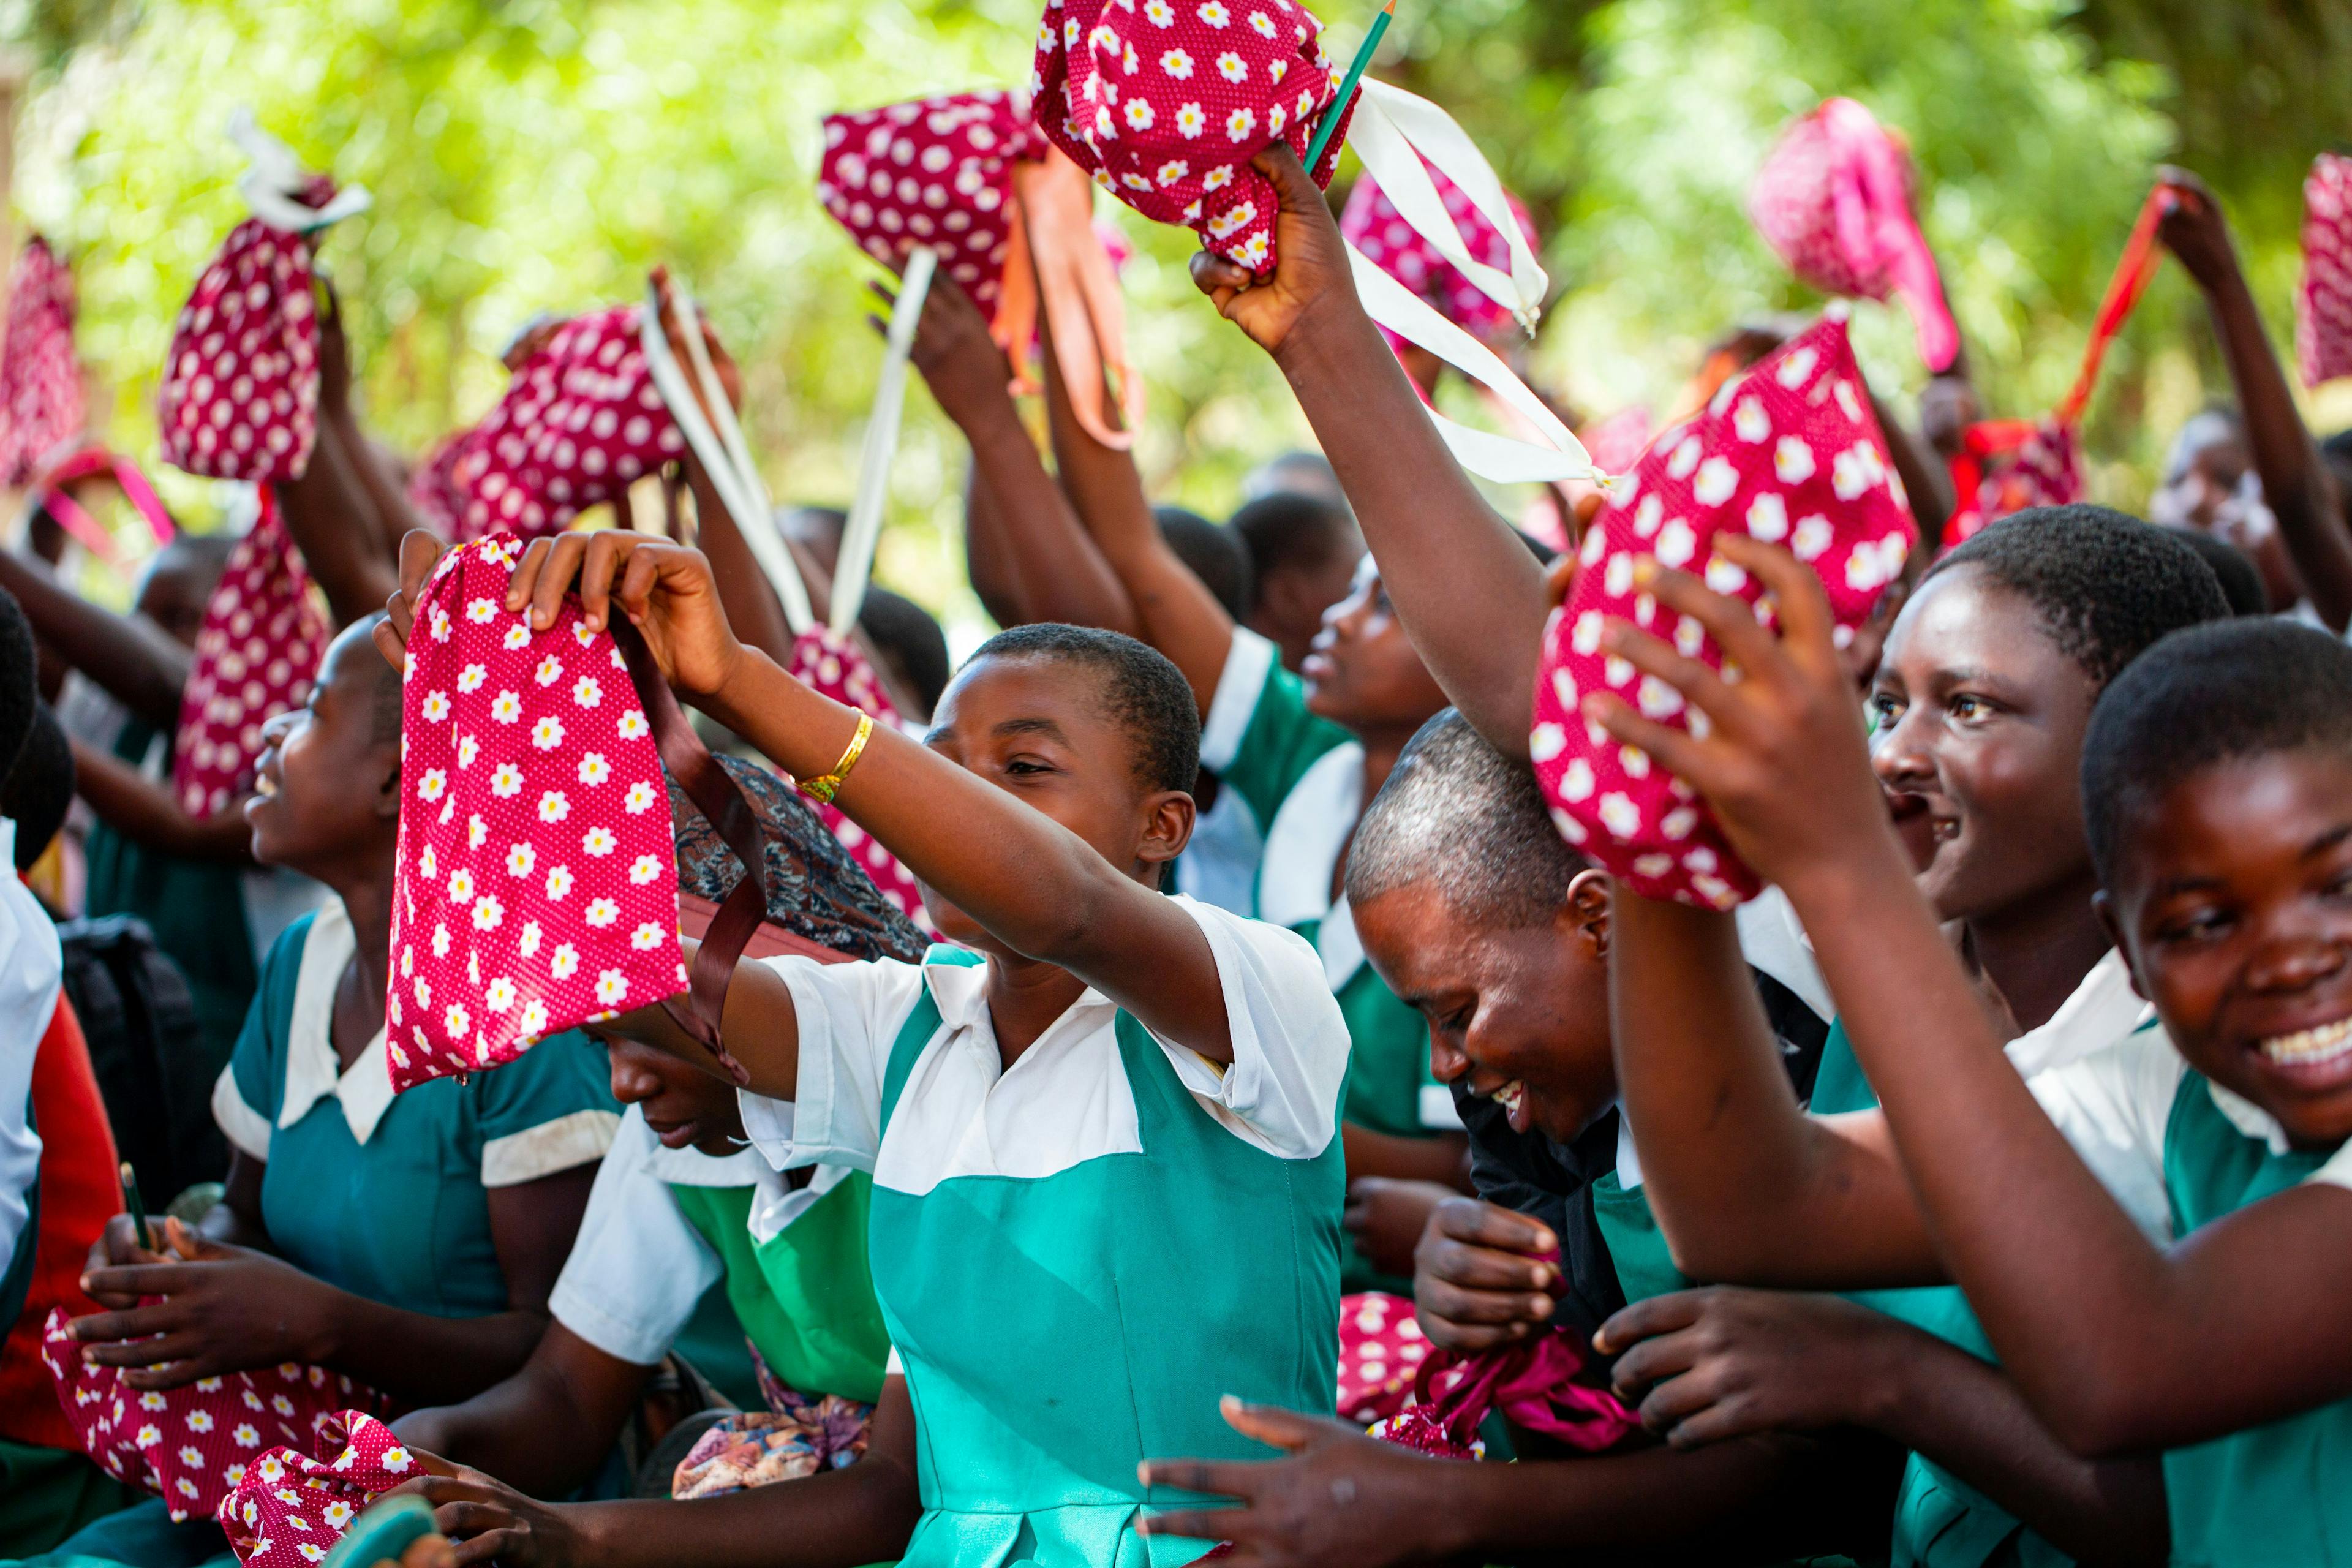 Young women in Africa celebrate as they receive new pad kits to help with menstrual hygiene.